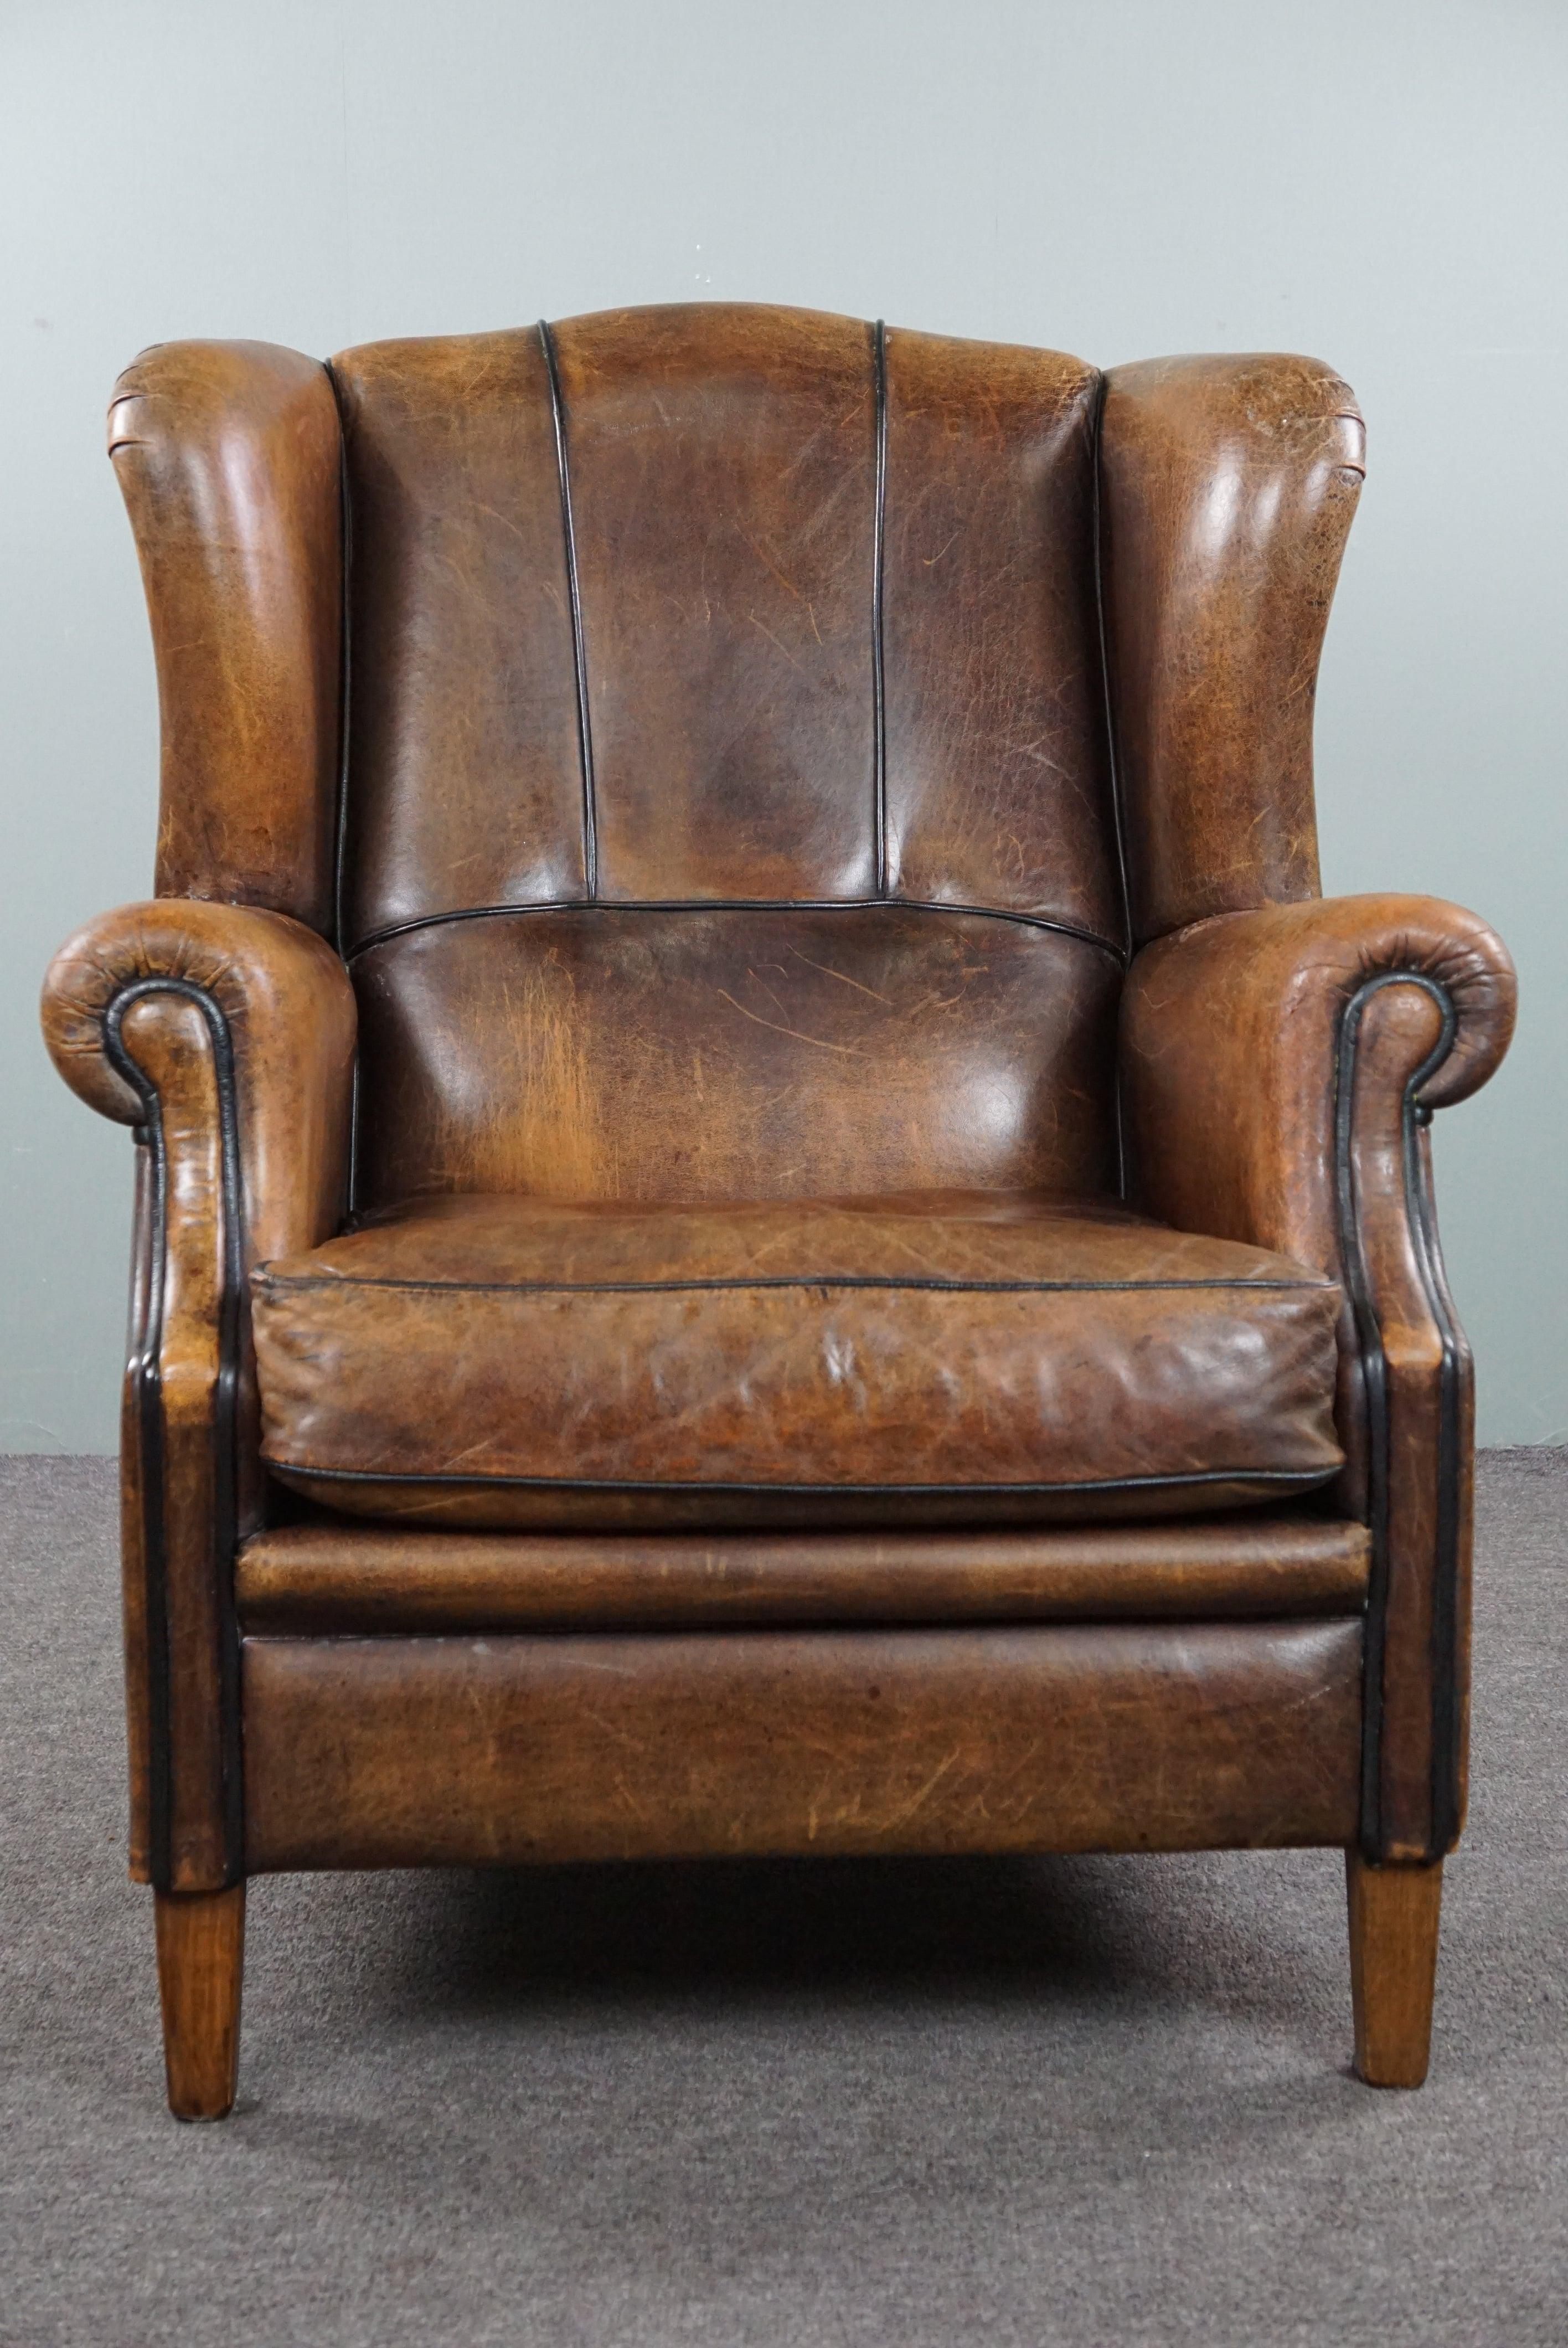 Offered is this charming positively lived-in sheepskin wingback chair finished with black piping. Through responsible use, this sheepskin wingback chair has acquired a positively lived-in appearance. The uniqueness of sheepskin leather is that signs